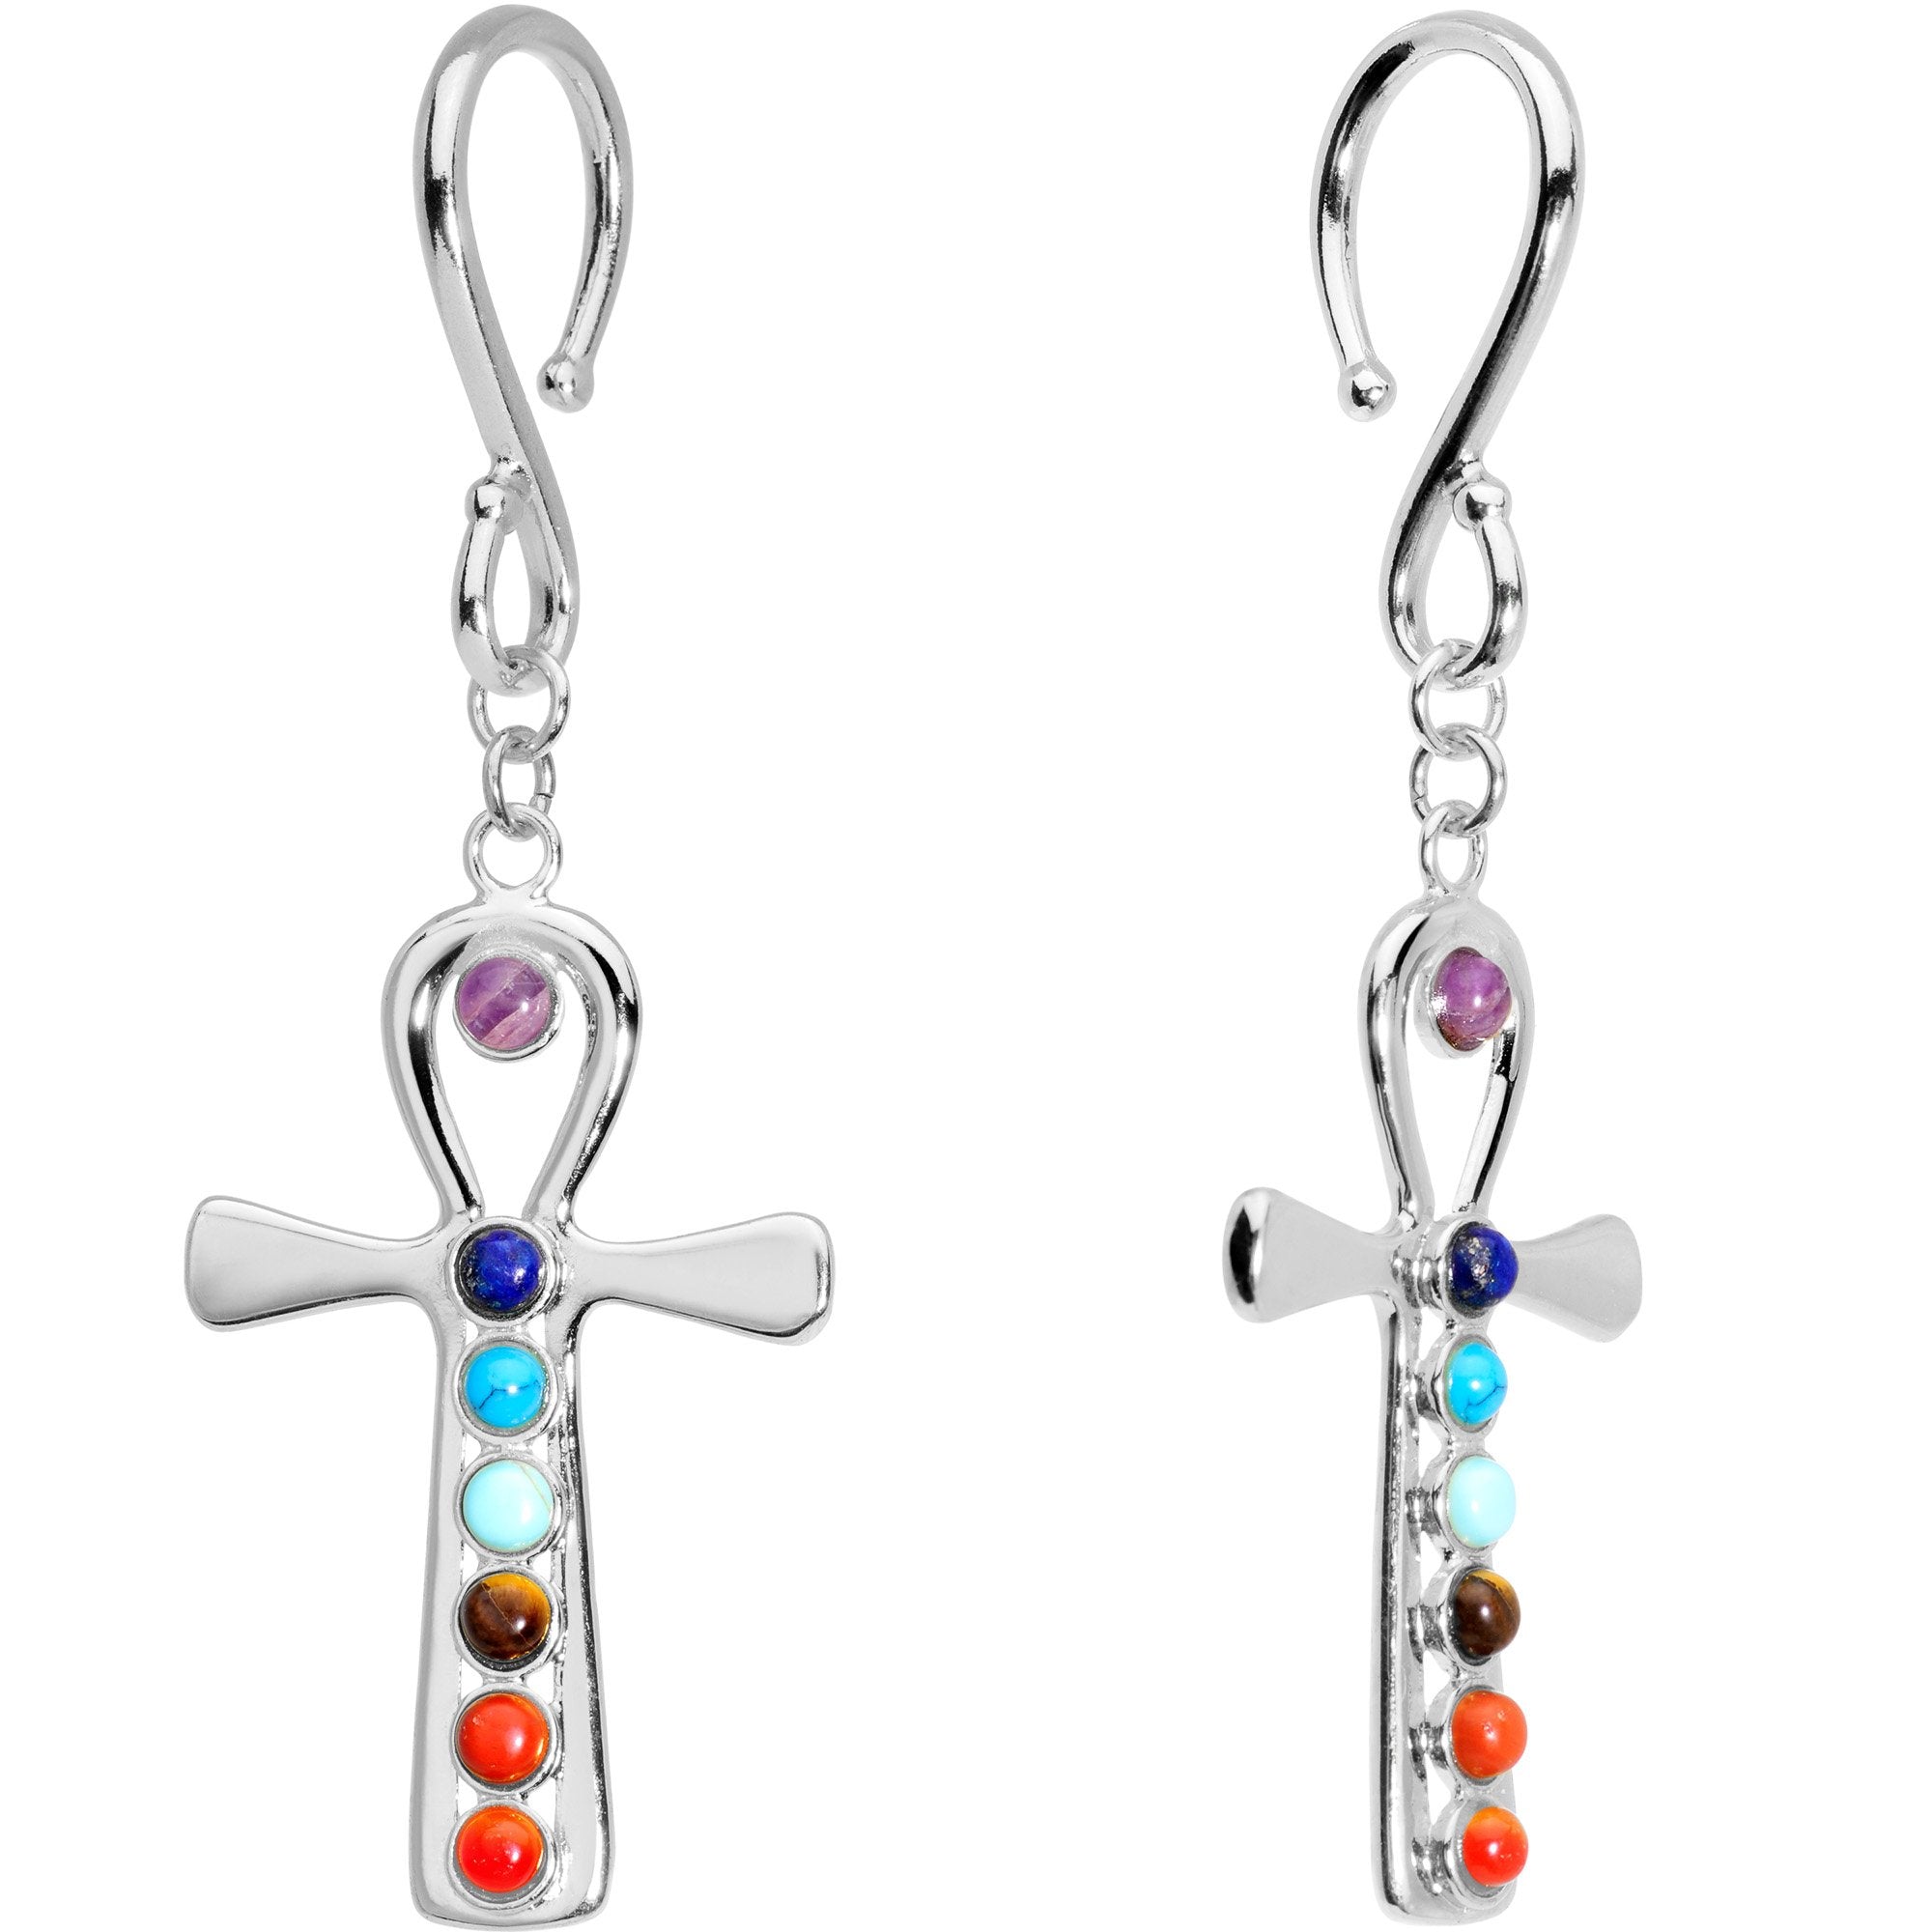 Handcrafted Steel Balanced Life Chakra Ankh Ear Weights